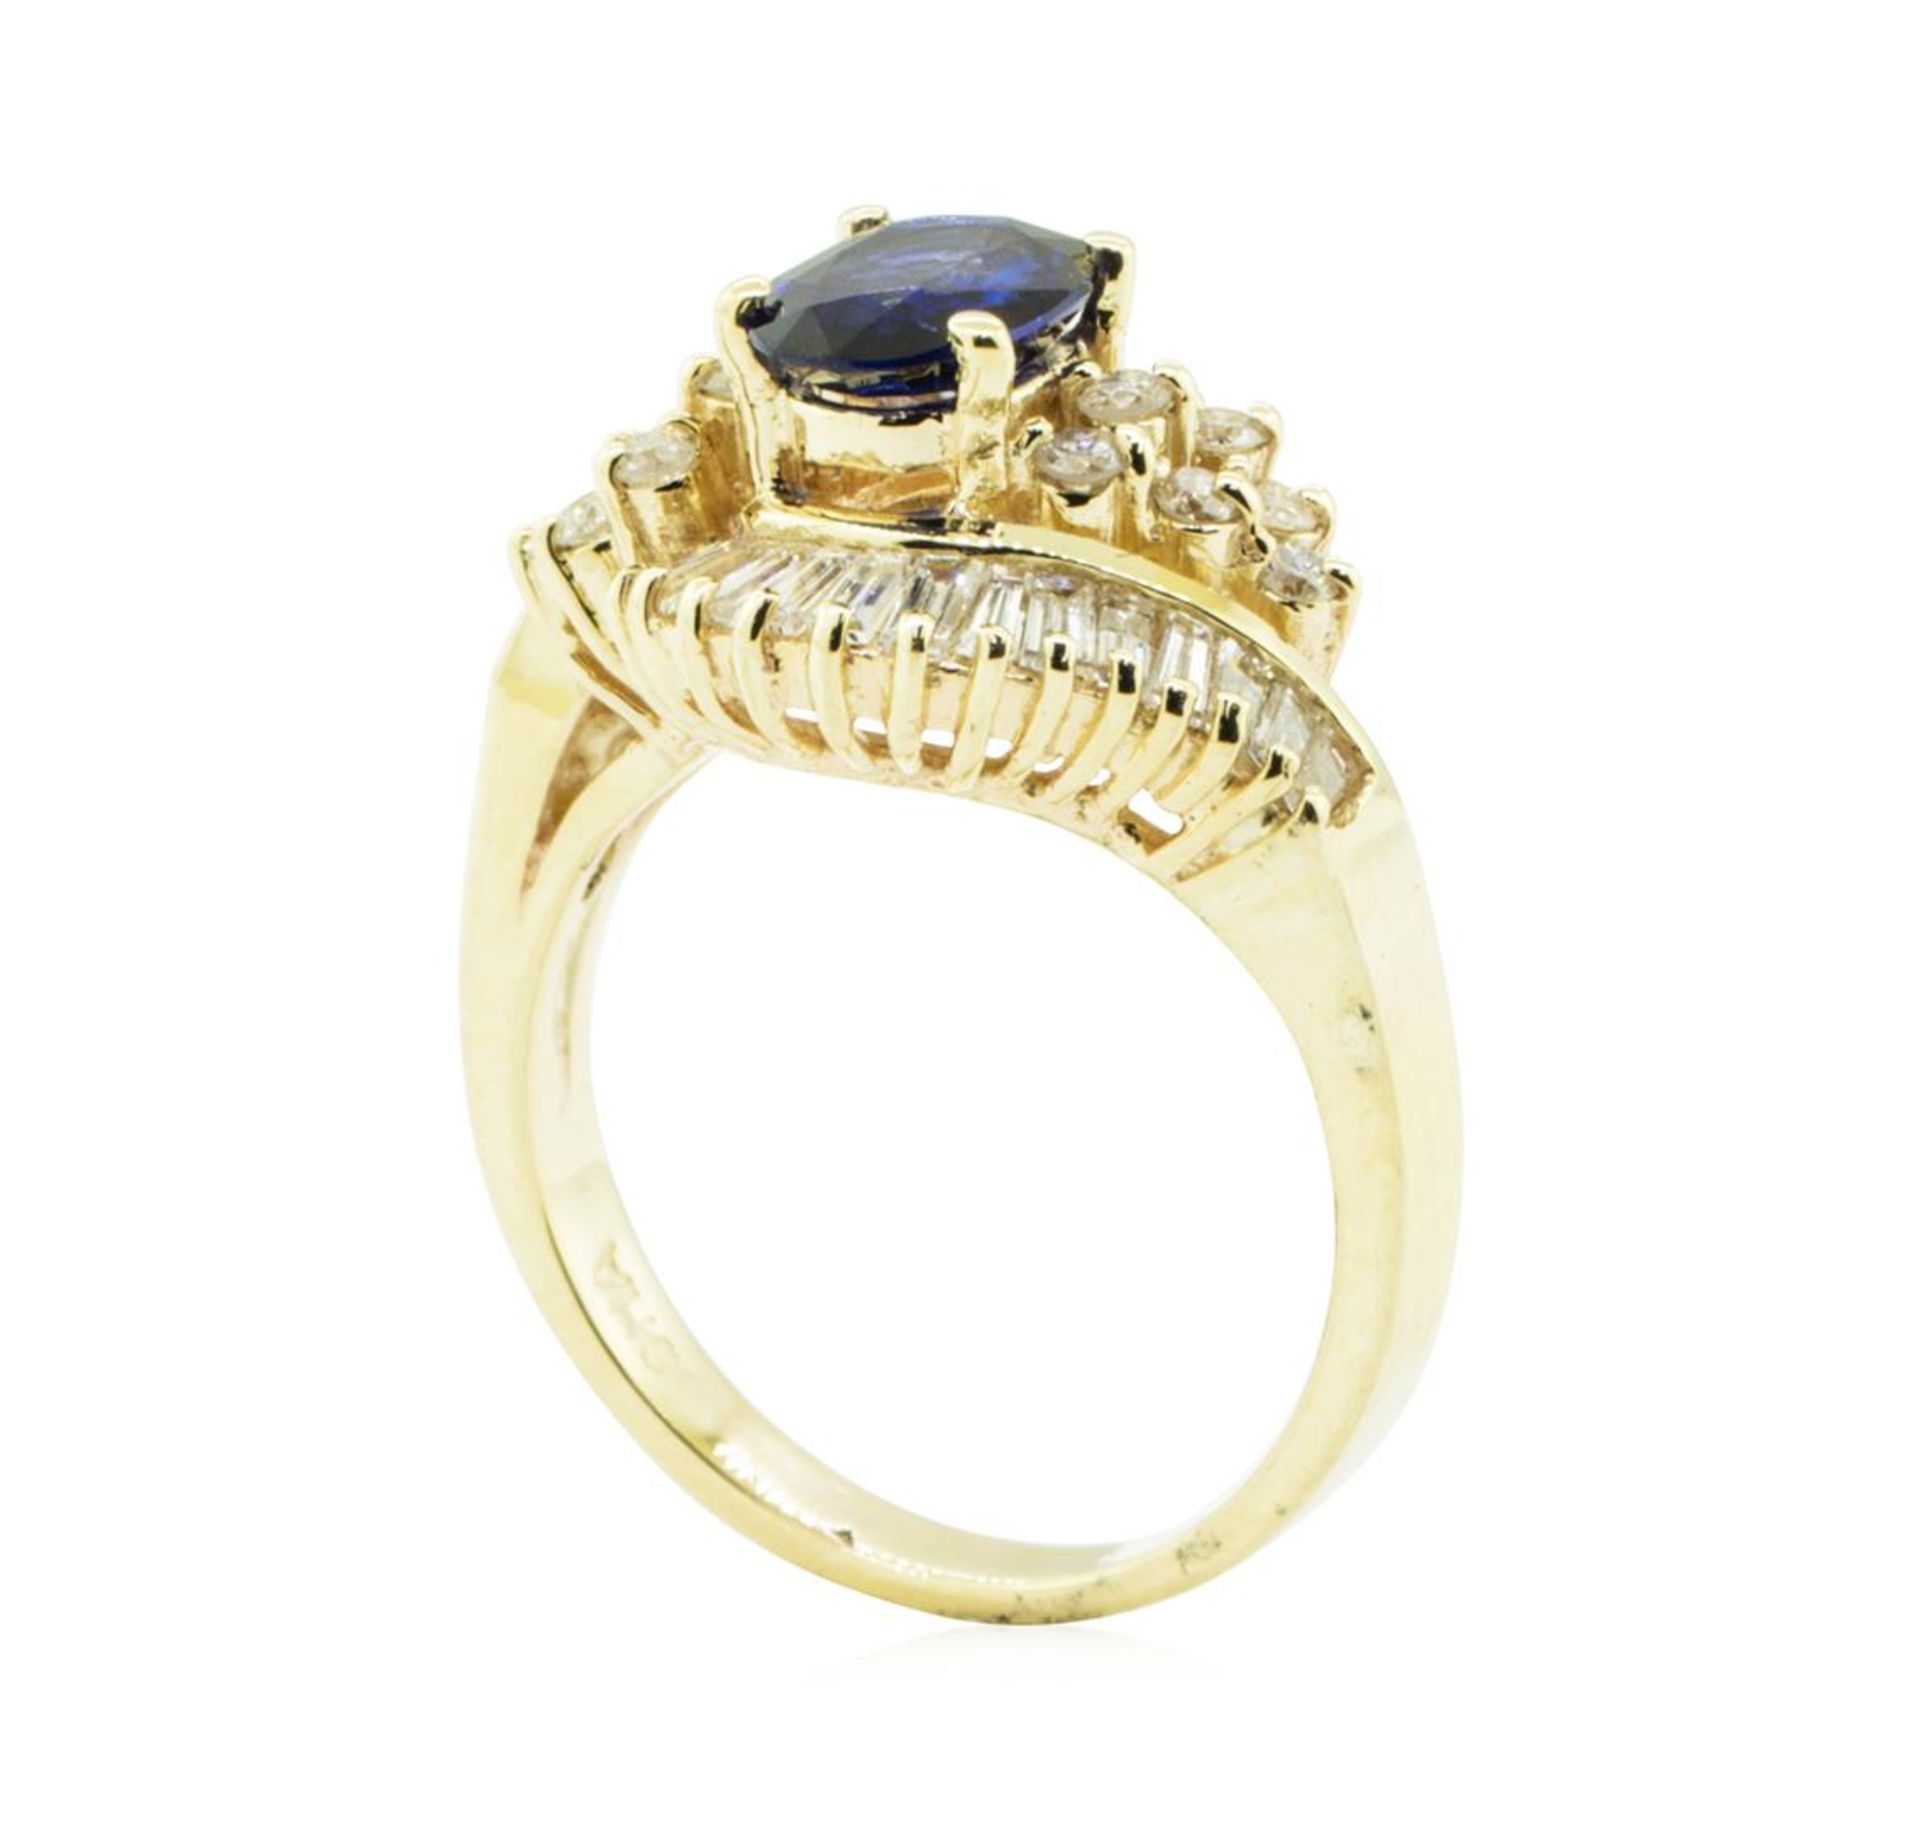 2.19 ctw Oval Brilliant Blue Sapphire And Diamond Ring - 14KT Yellow Gold - Image 4 of 5